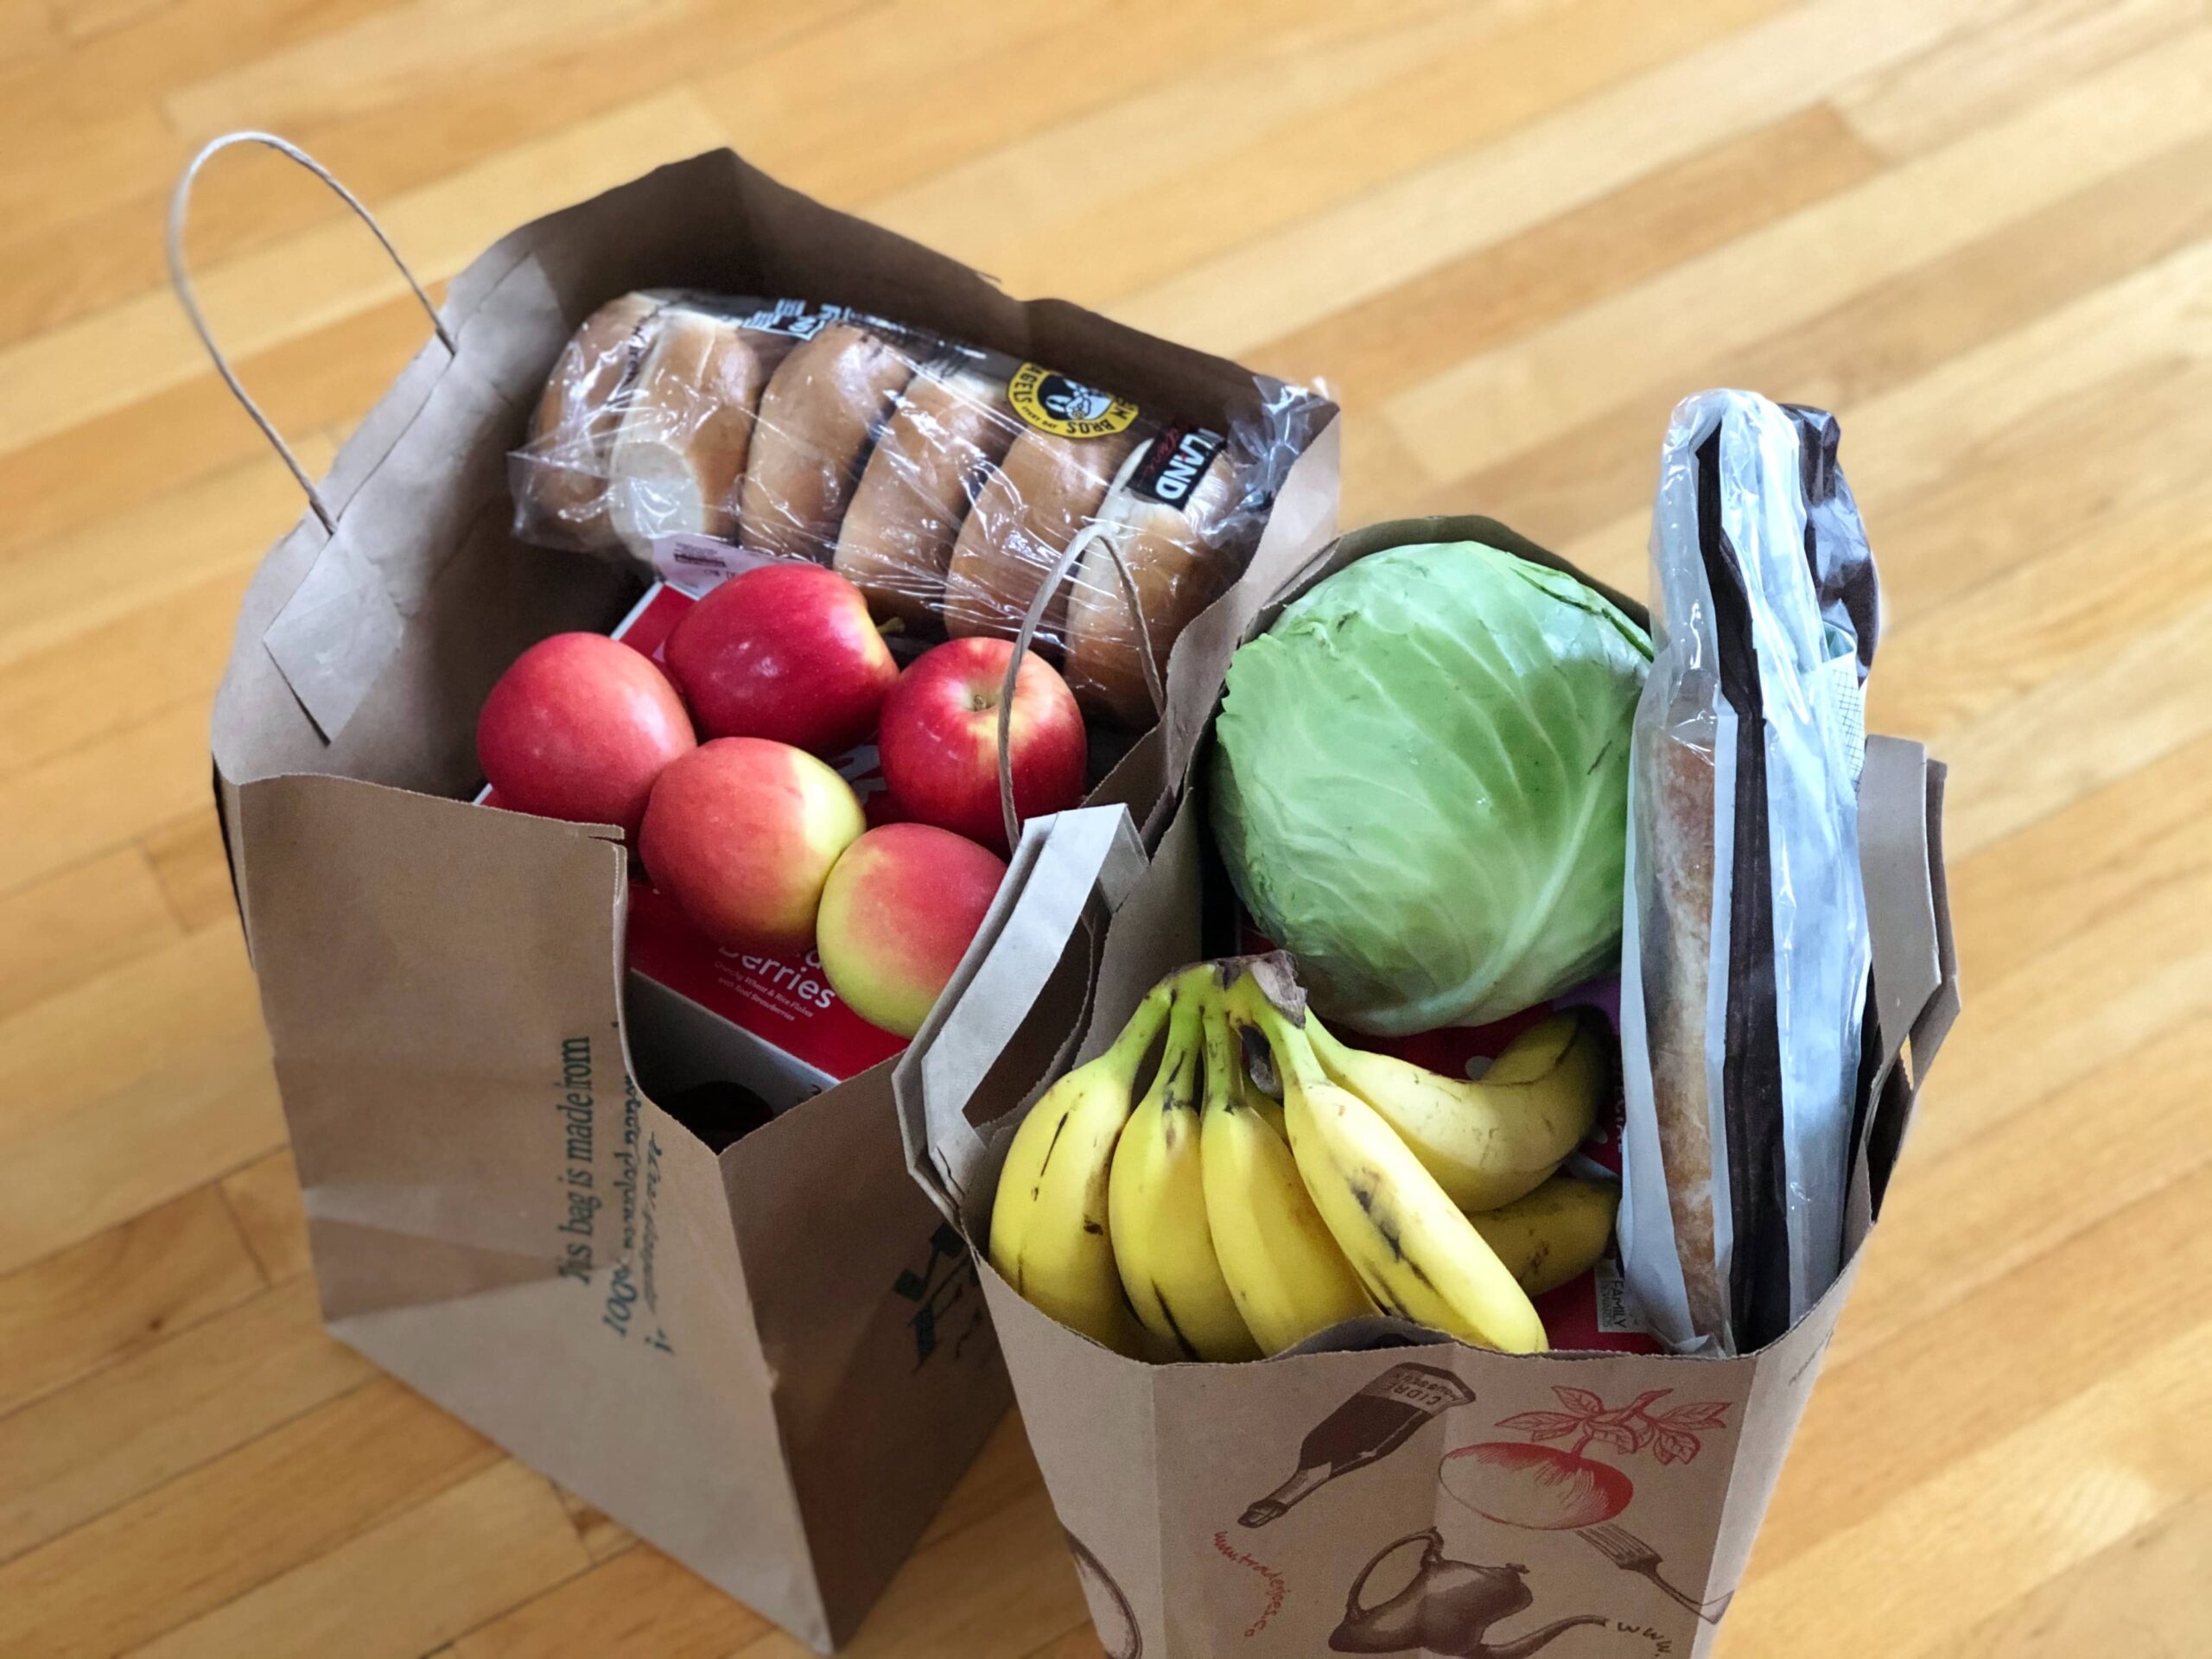 Two full grocery bags with apples, bananas, bagels and cabbage on top